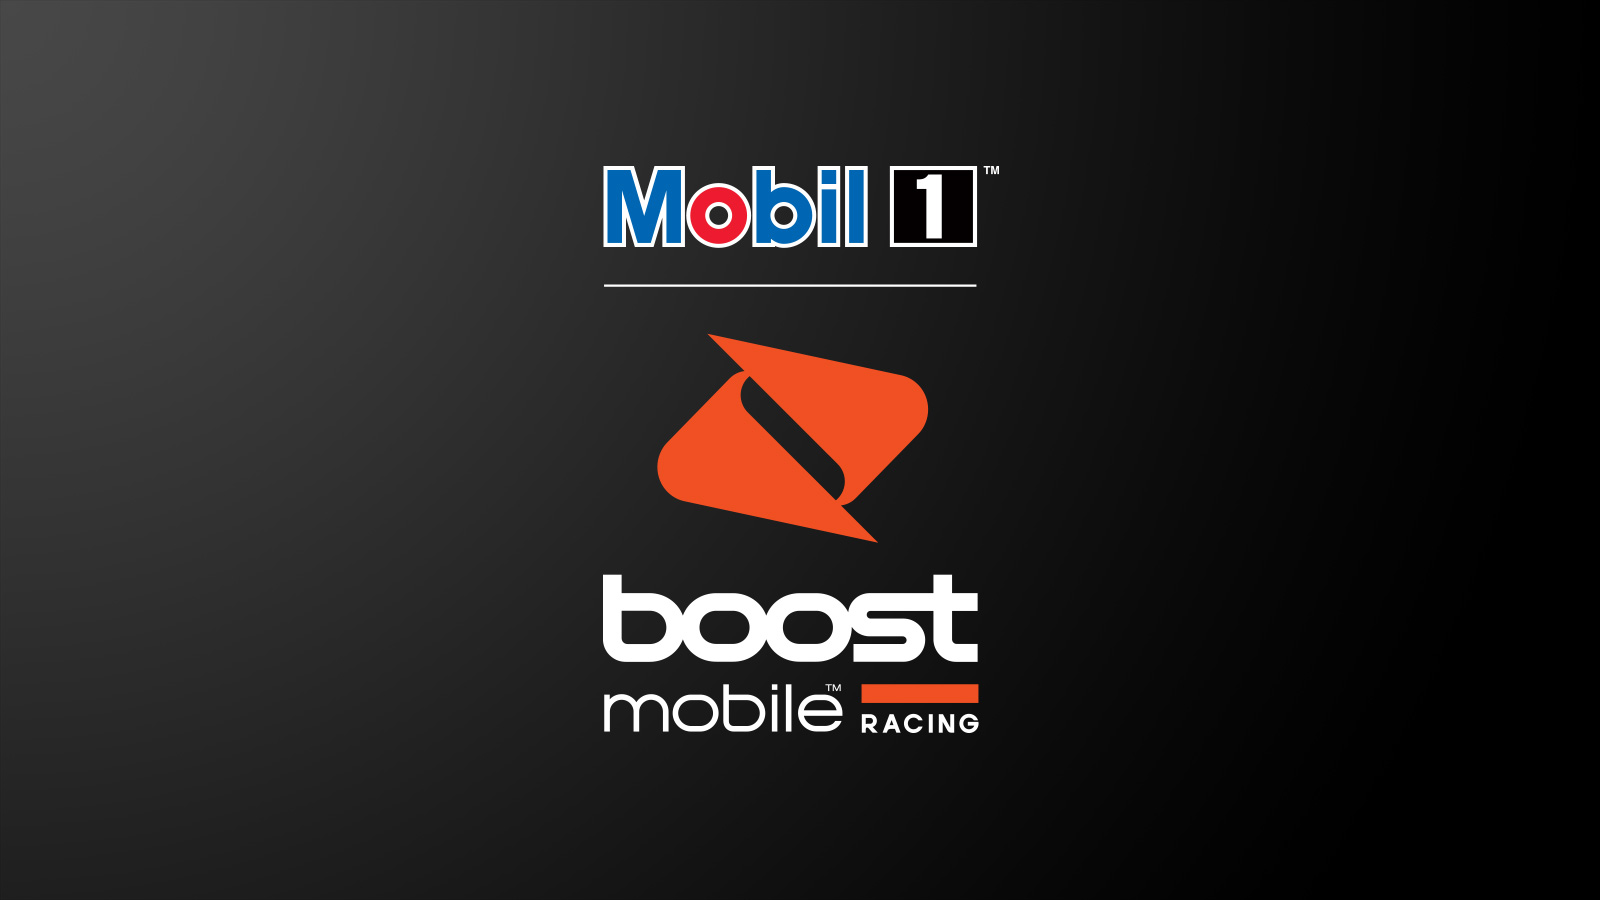 Mobil 1 Boost Mobile Racing is born.